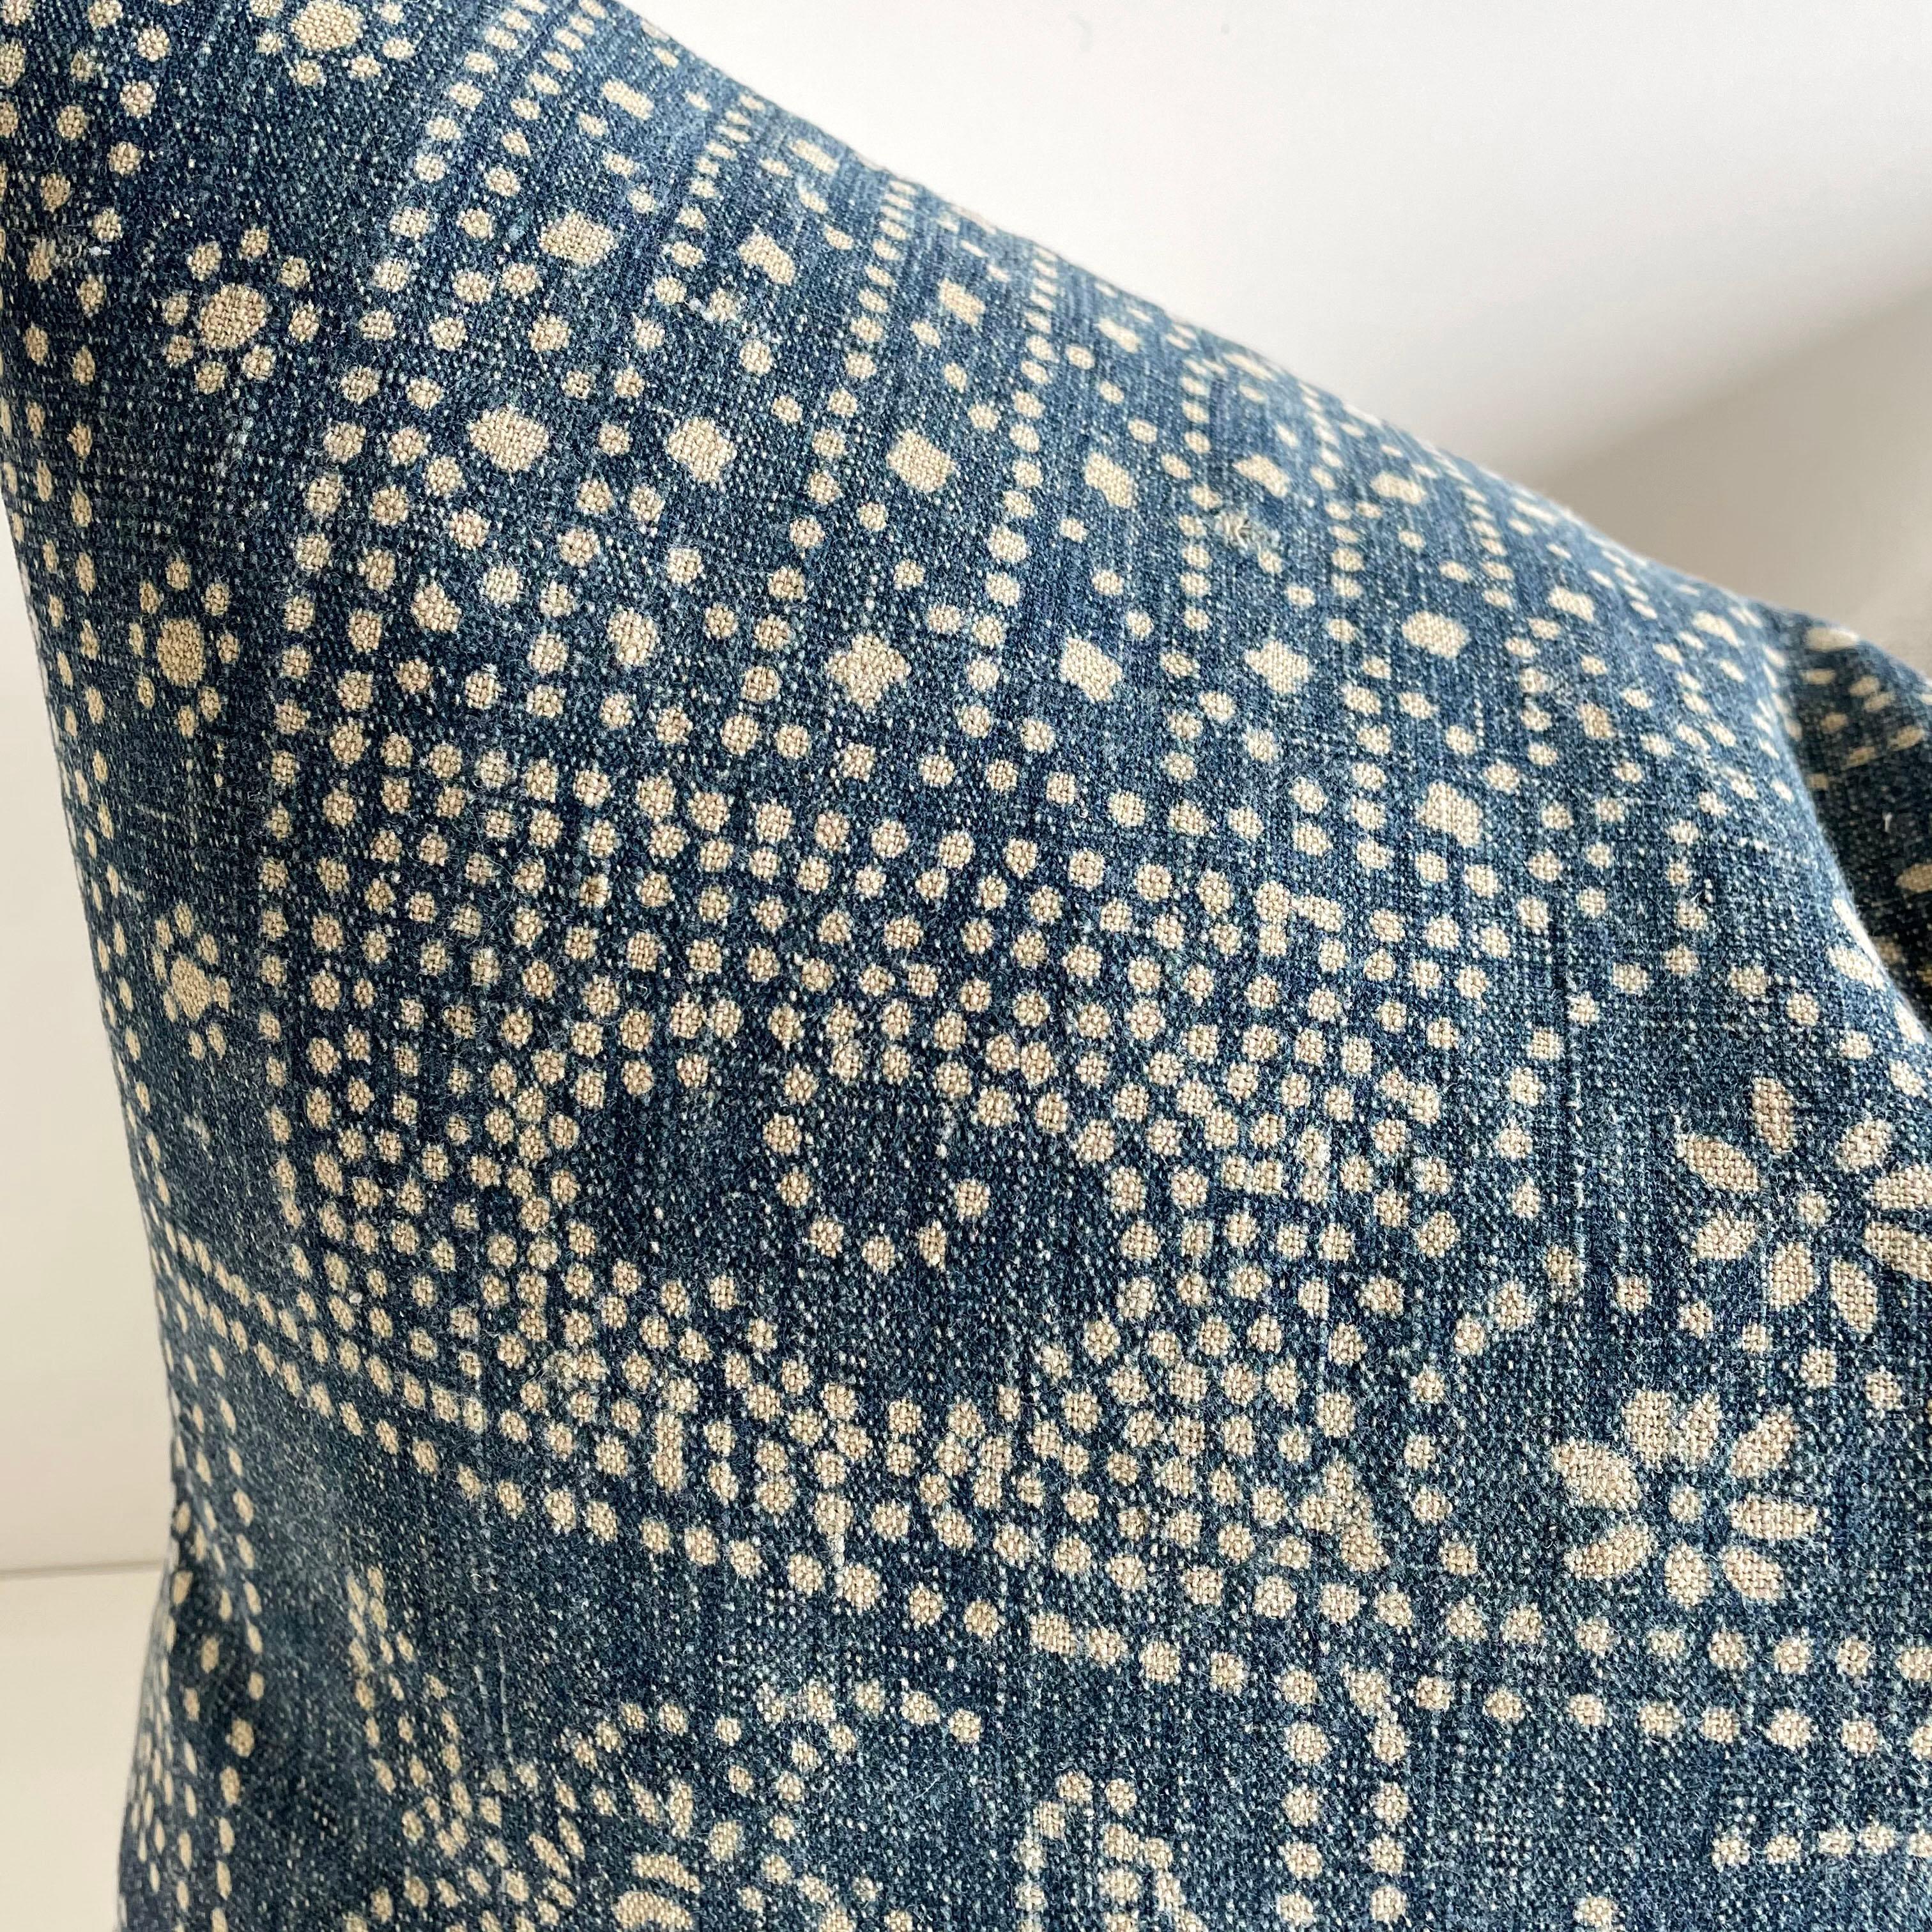 Vintage custom made Batik blue accent pillow with down feather insert this vintage textile pillow face features a vintage batik front, natural linen backing, and original hand embroidery. The backing is 100% Belgian linen in natural linen. Our